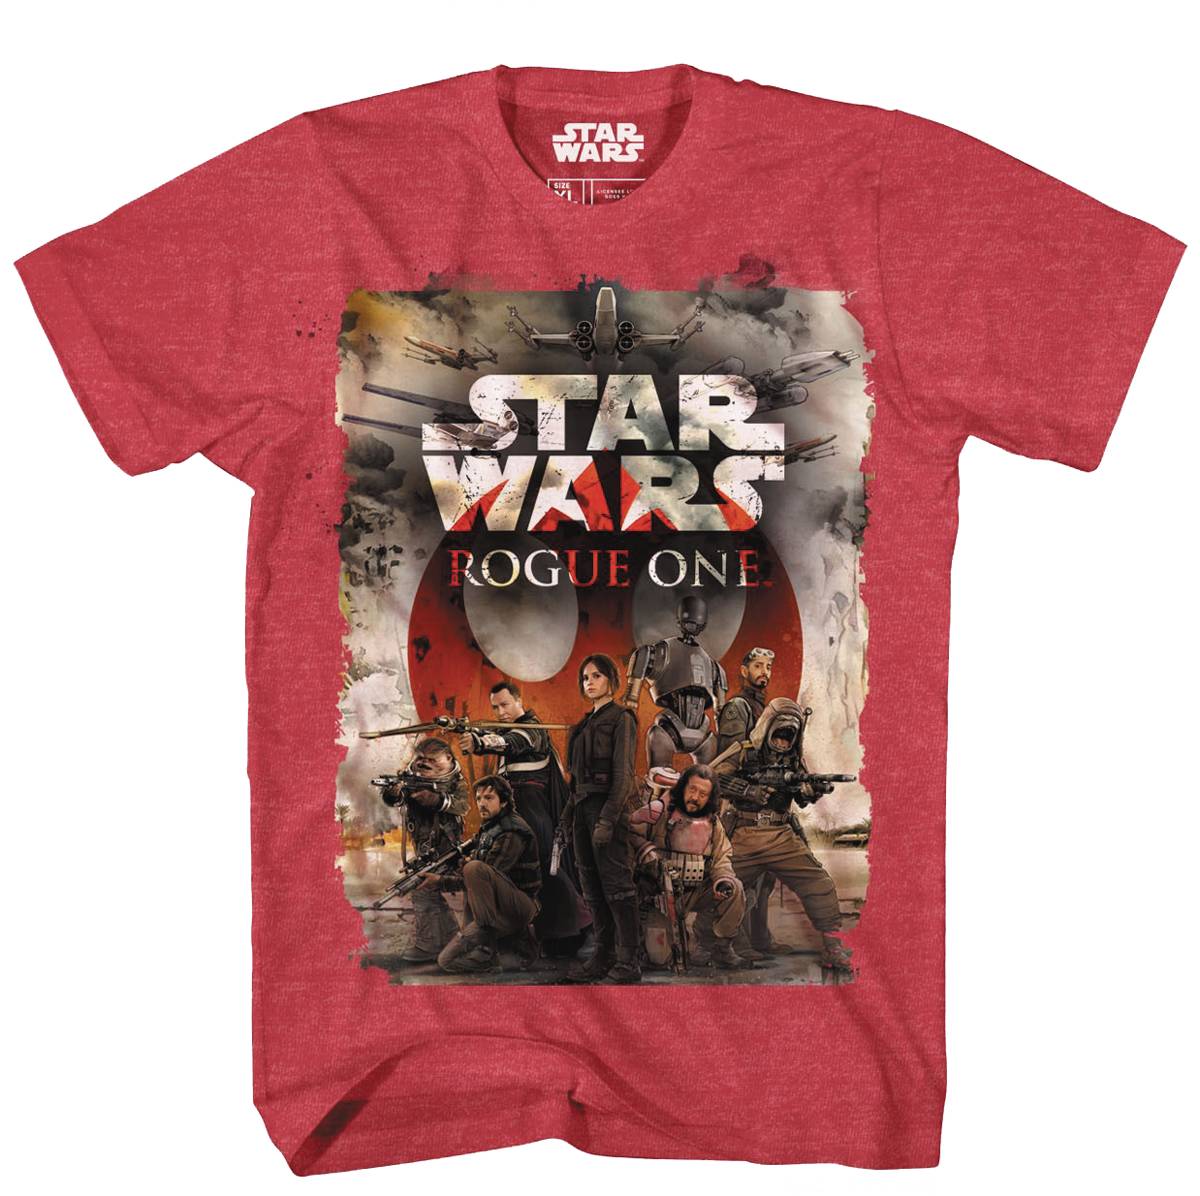 Star Wars Team One Red T-shirt (Large) 